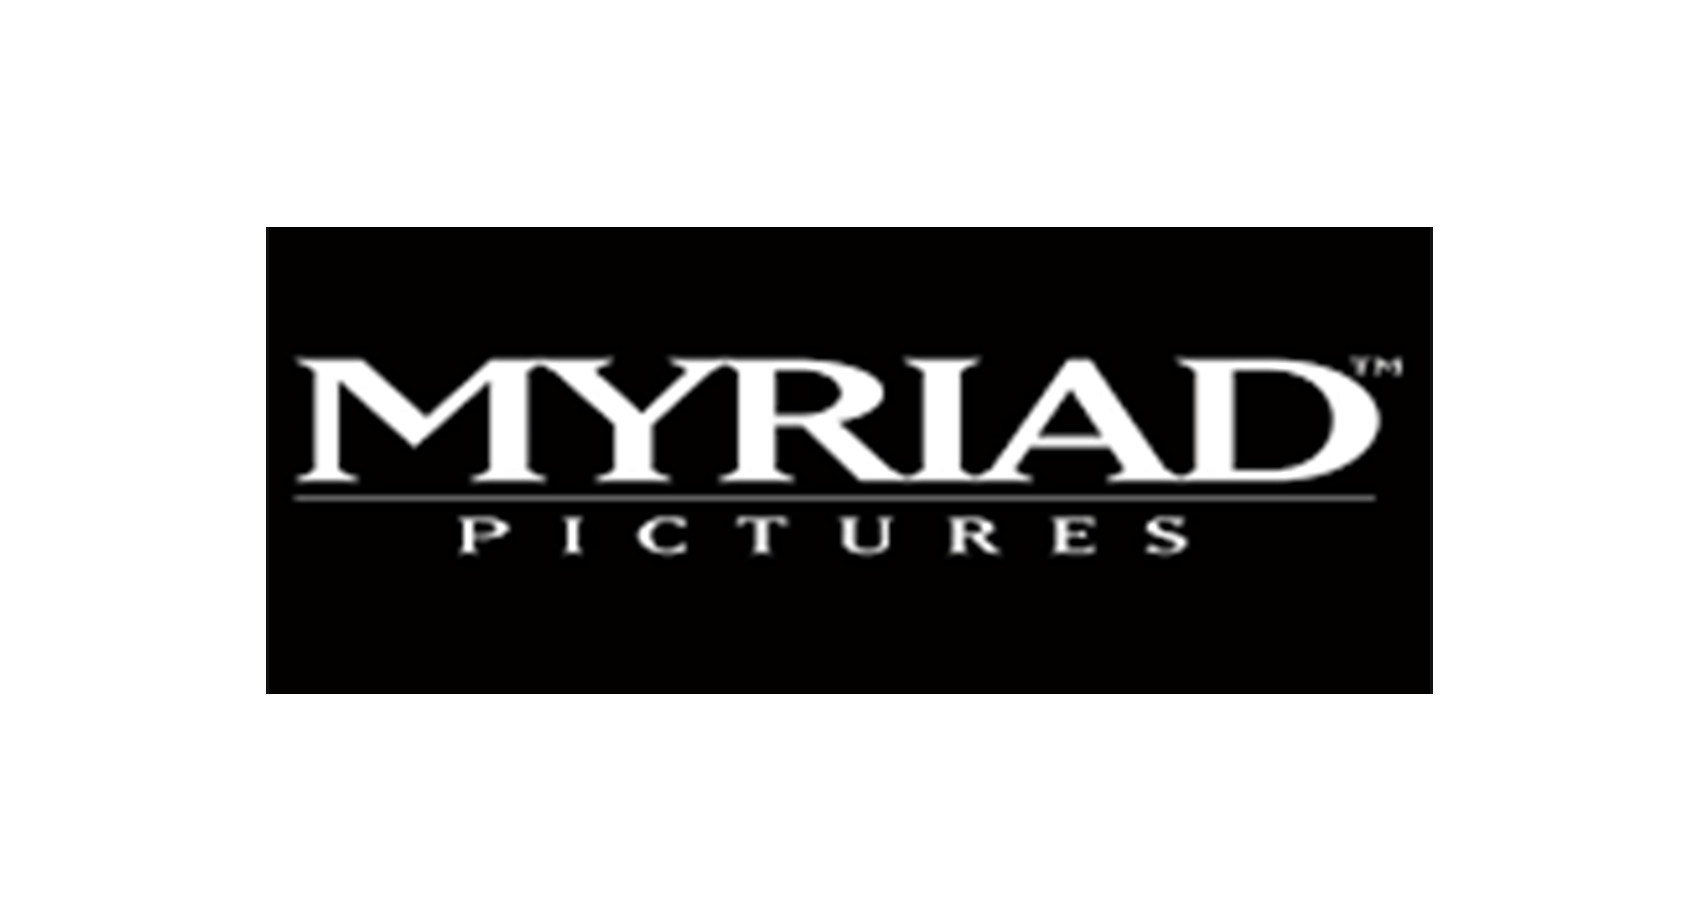 Myriad pictures